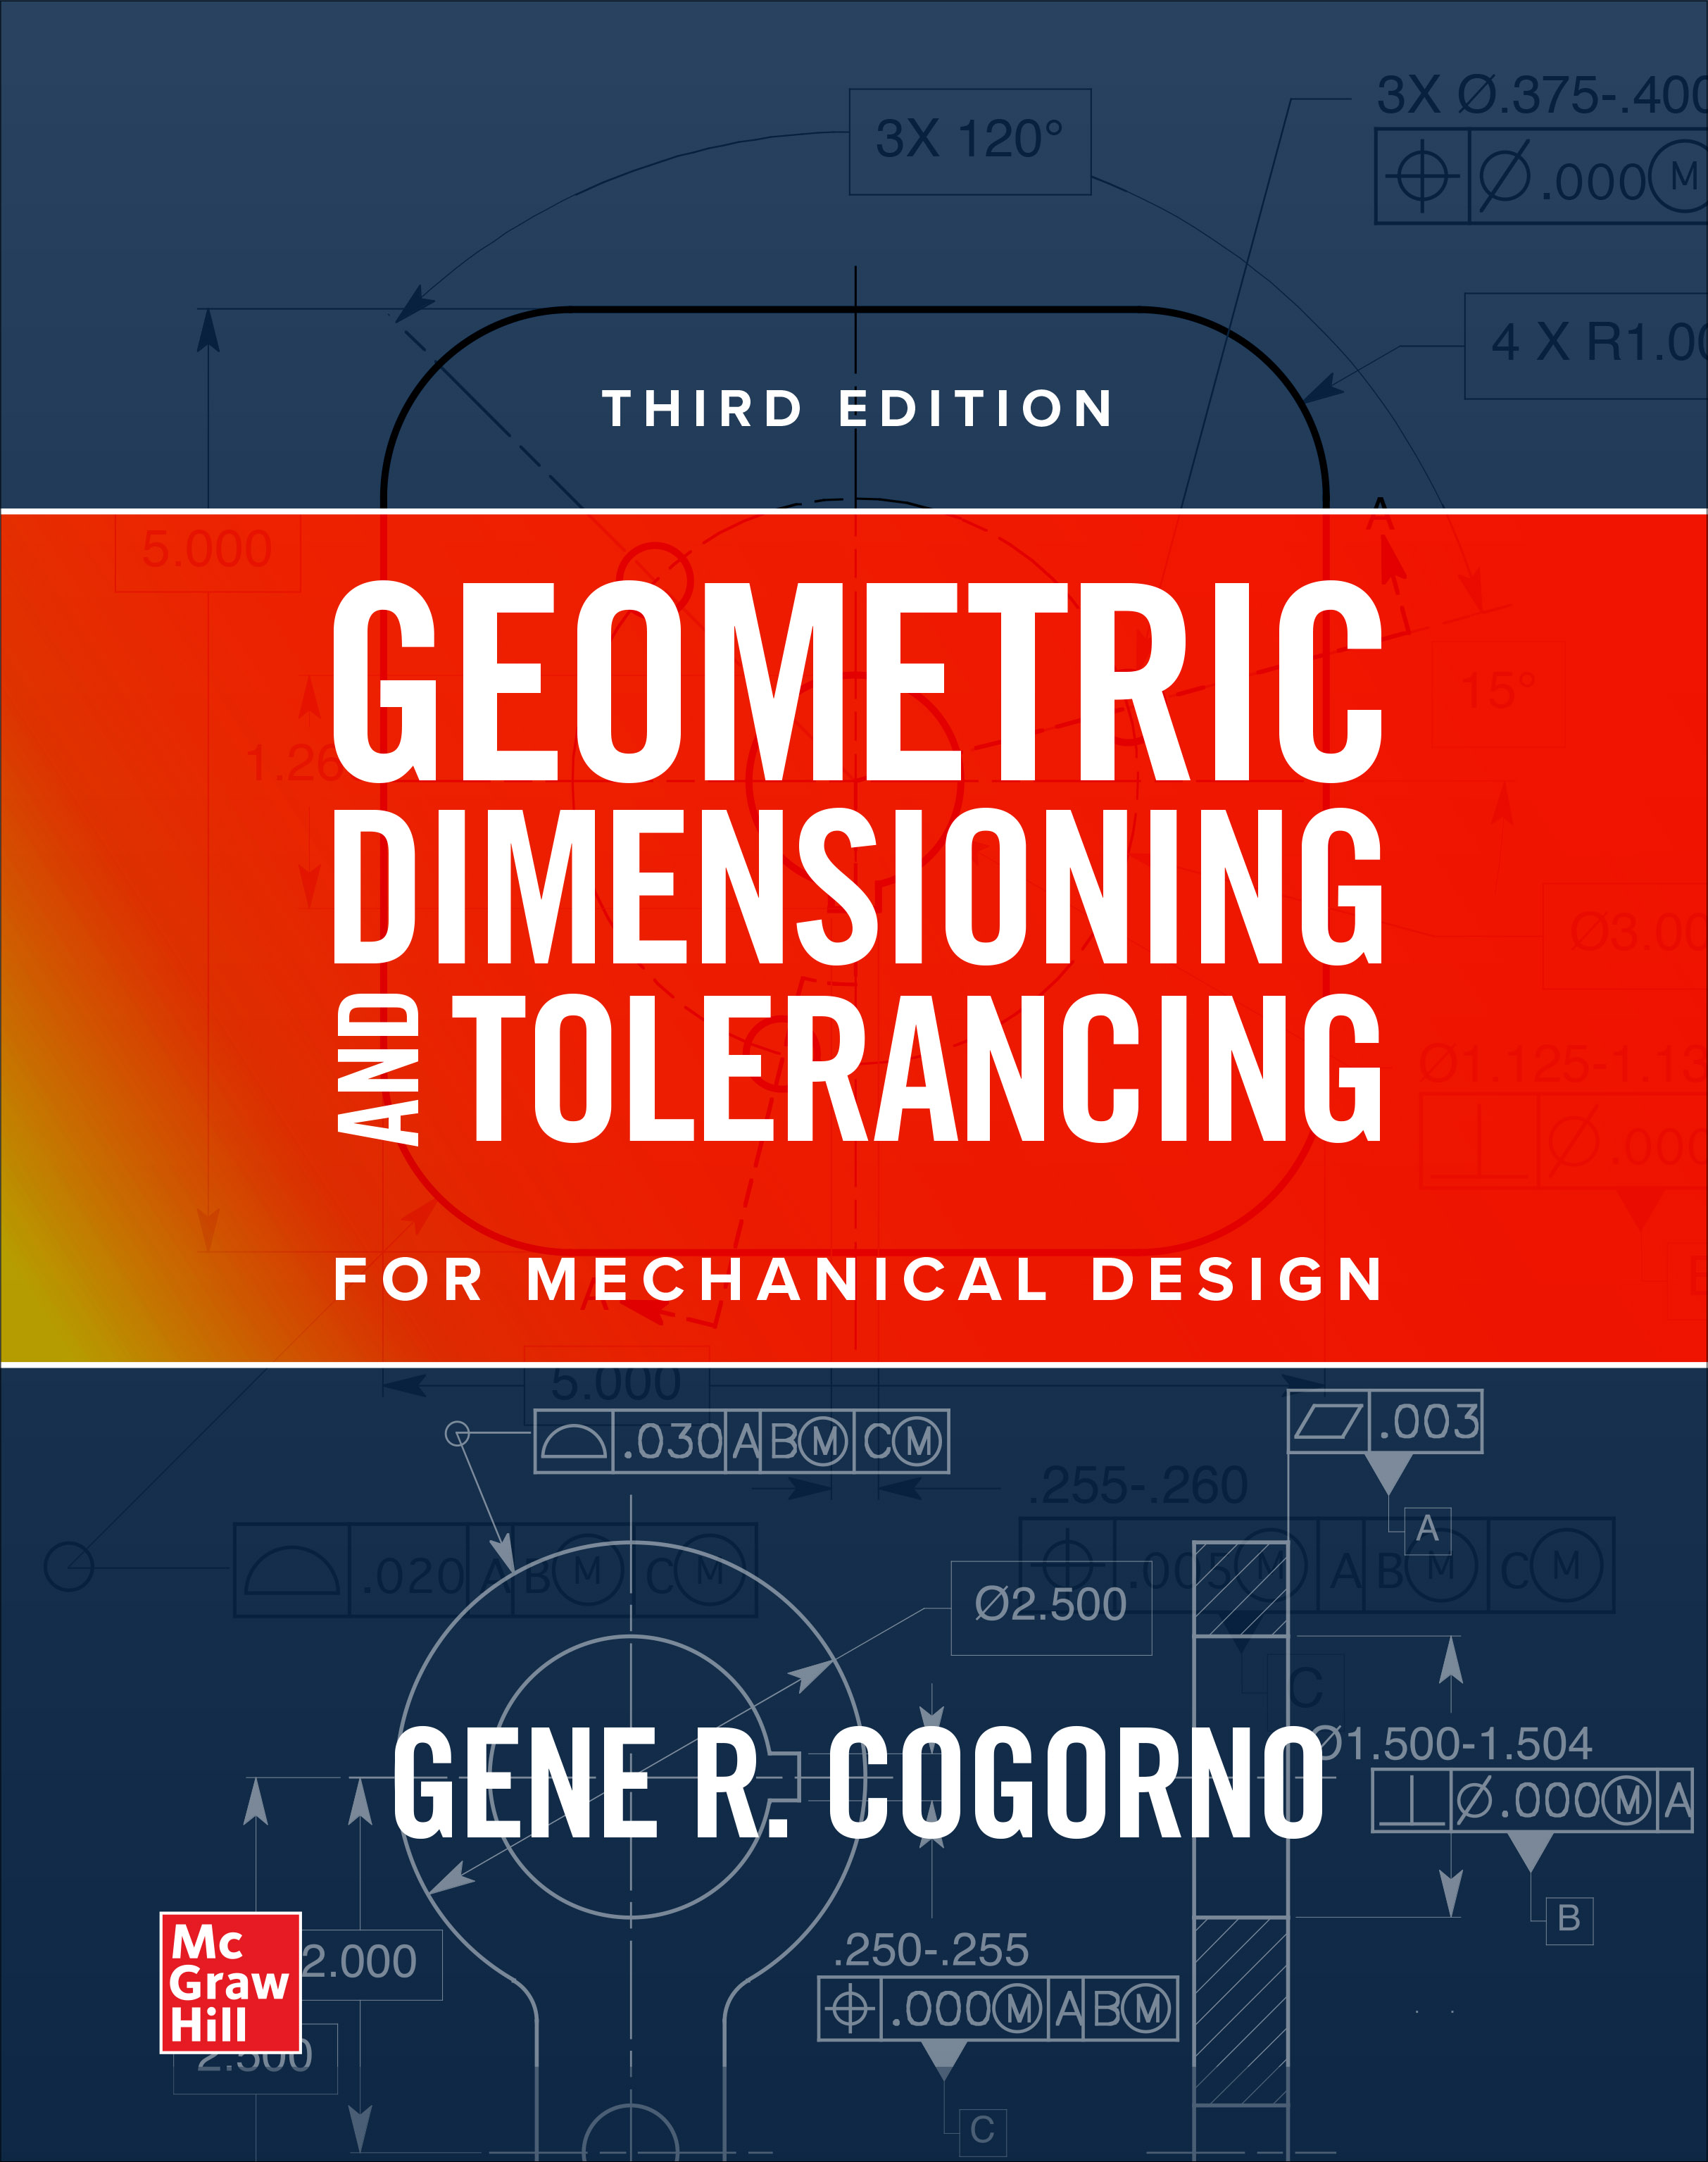 Geometric Dimensioning and Tolerancing for Mechanical Design, 3E